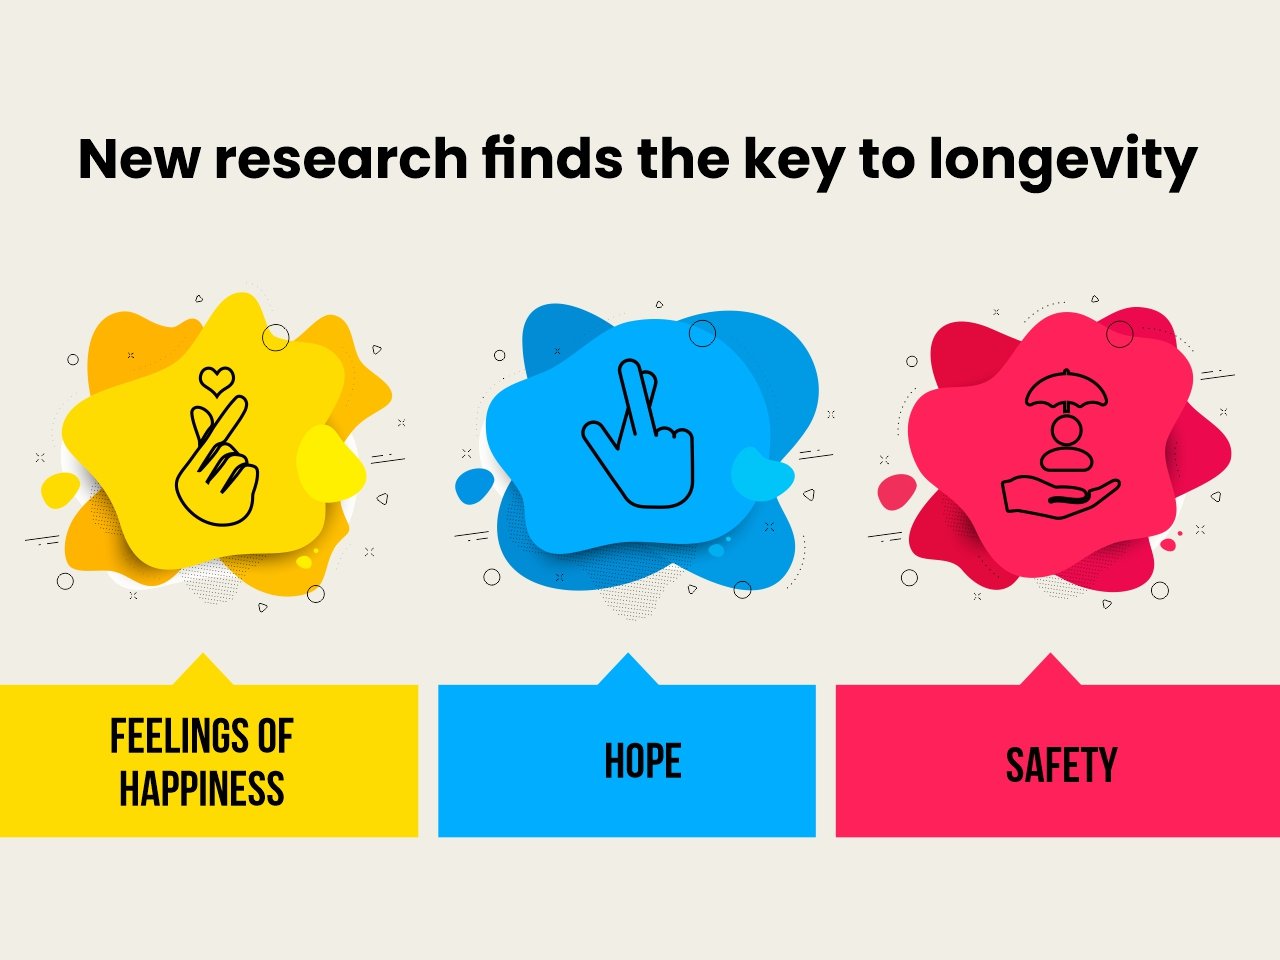 The secret to healthy longevity is happiness, recent research shows